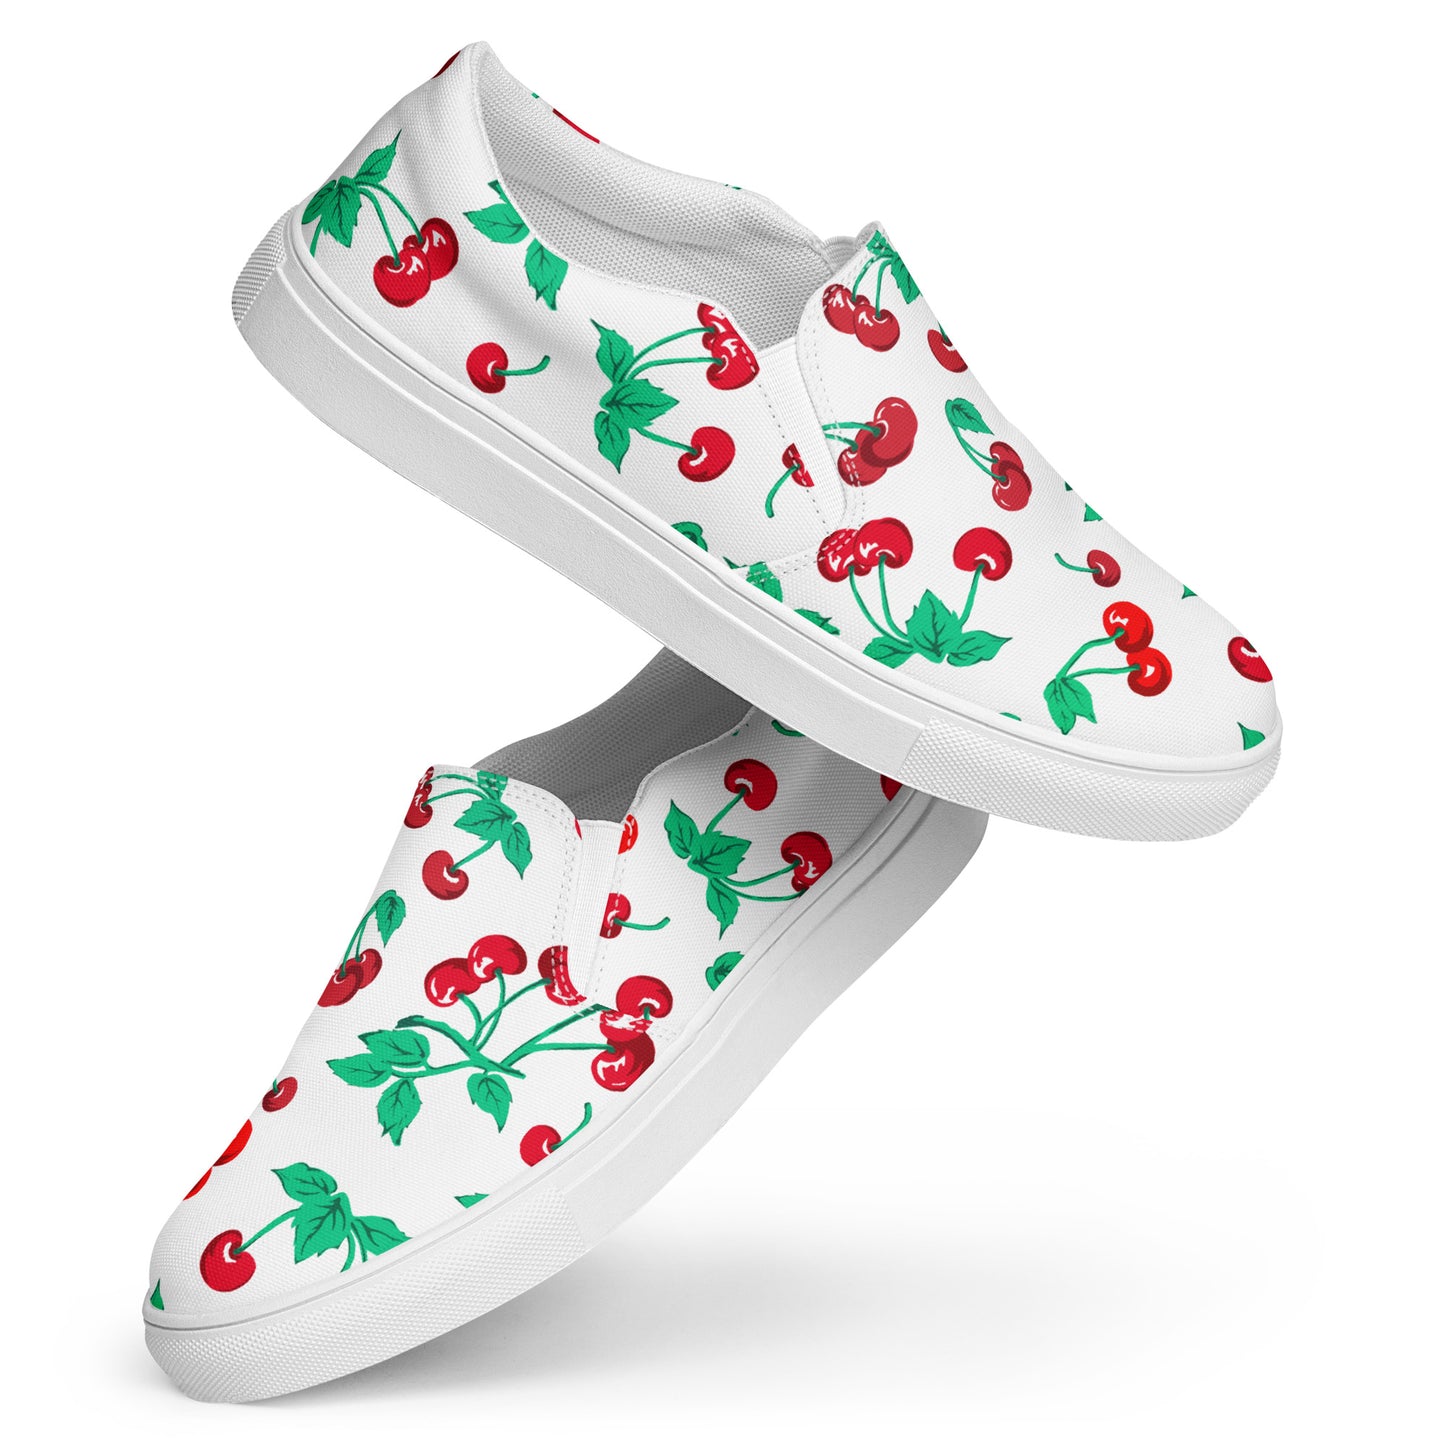 White Chocolate Cherry Print Women’s Canvas Slip-On Deck Shoes | Pinup Couture Relaxed